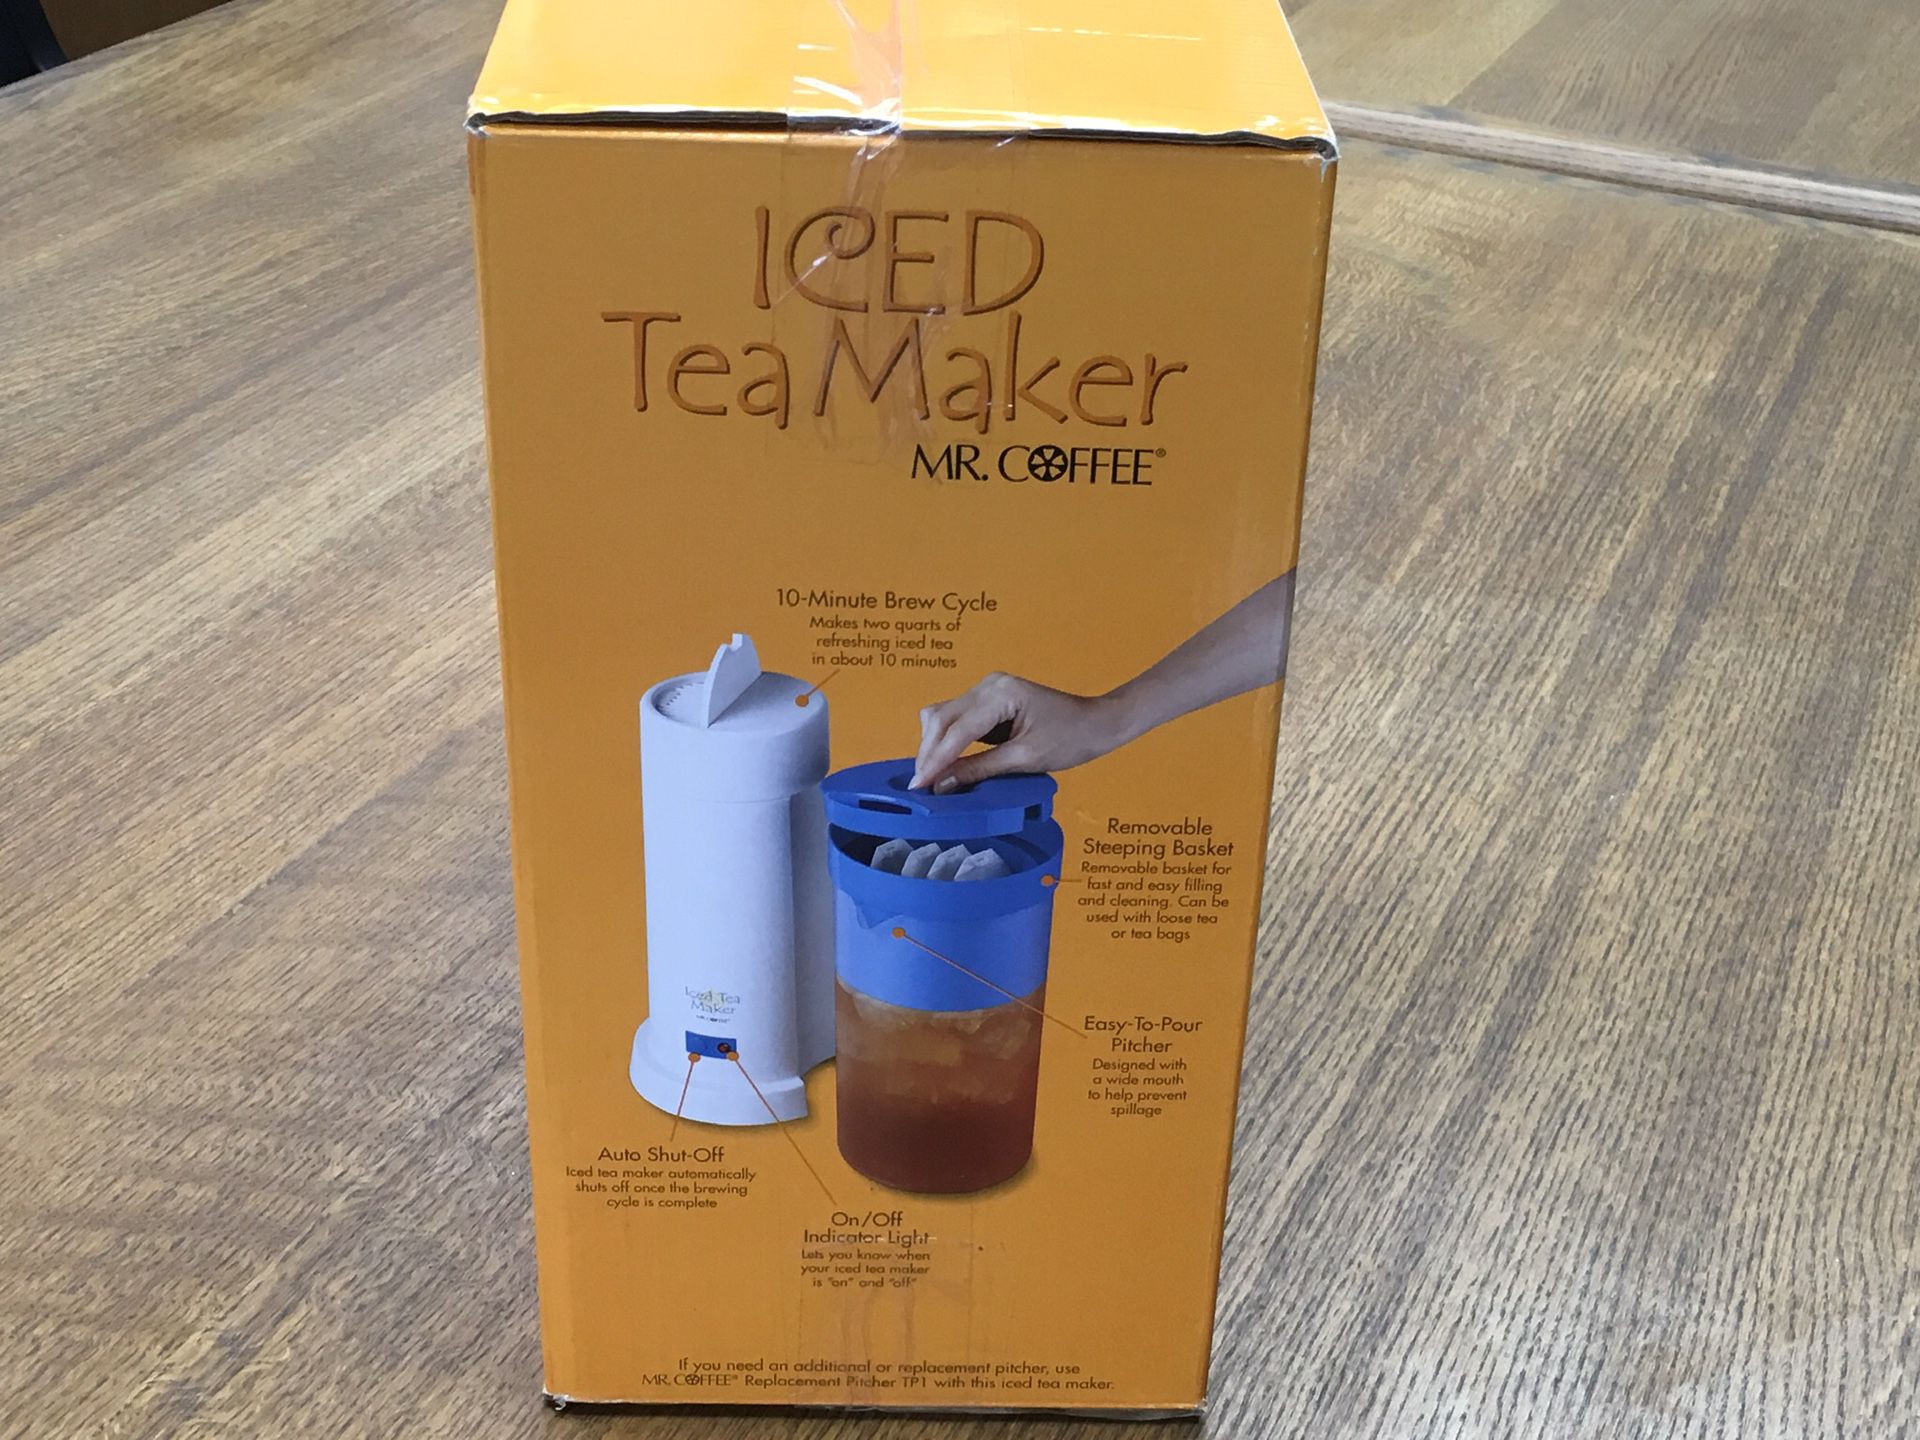 Iced Tea Maker from Mr. Coffee